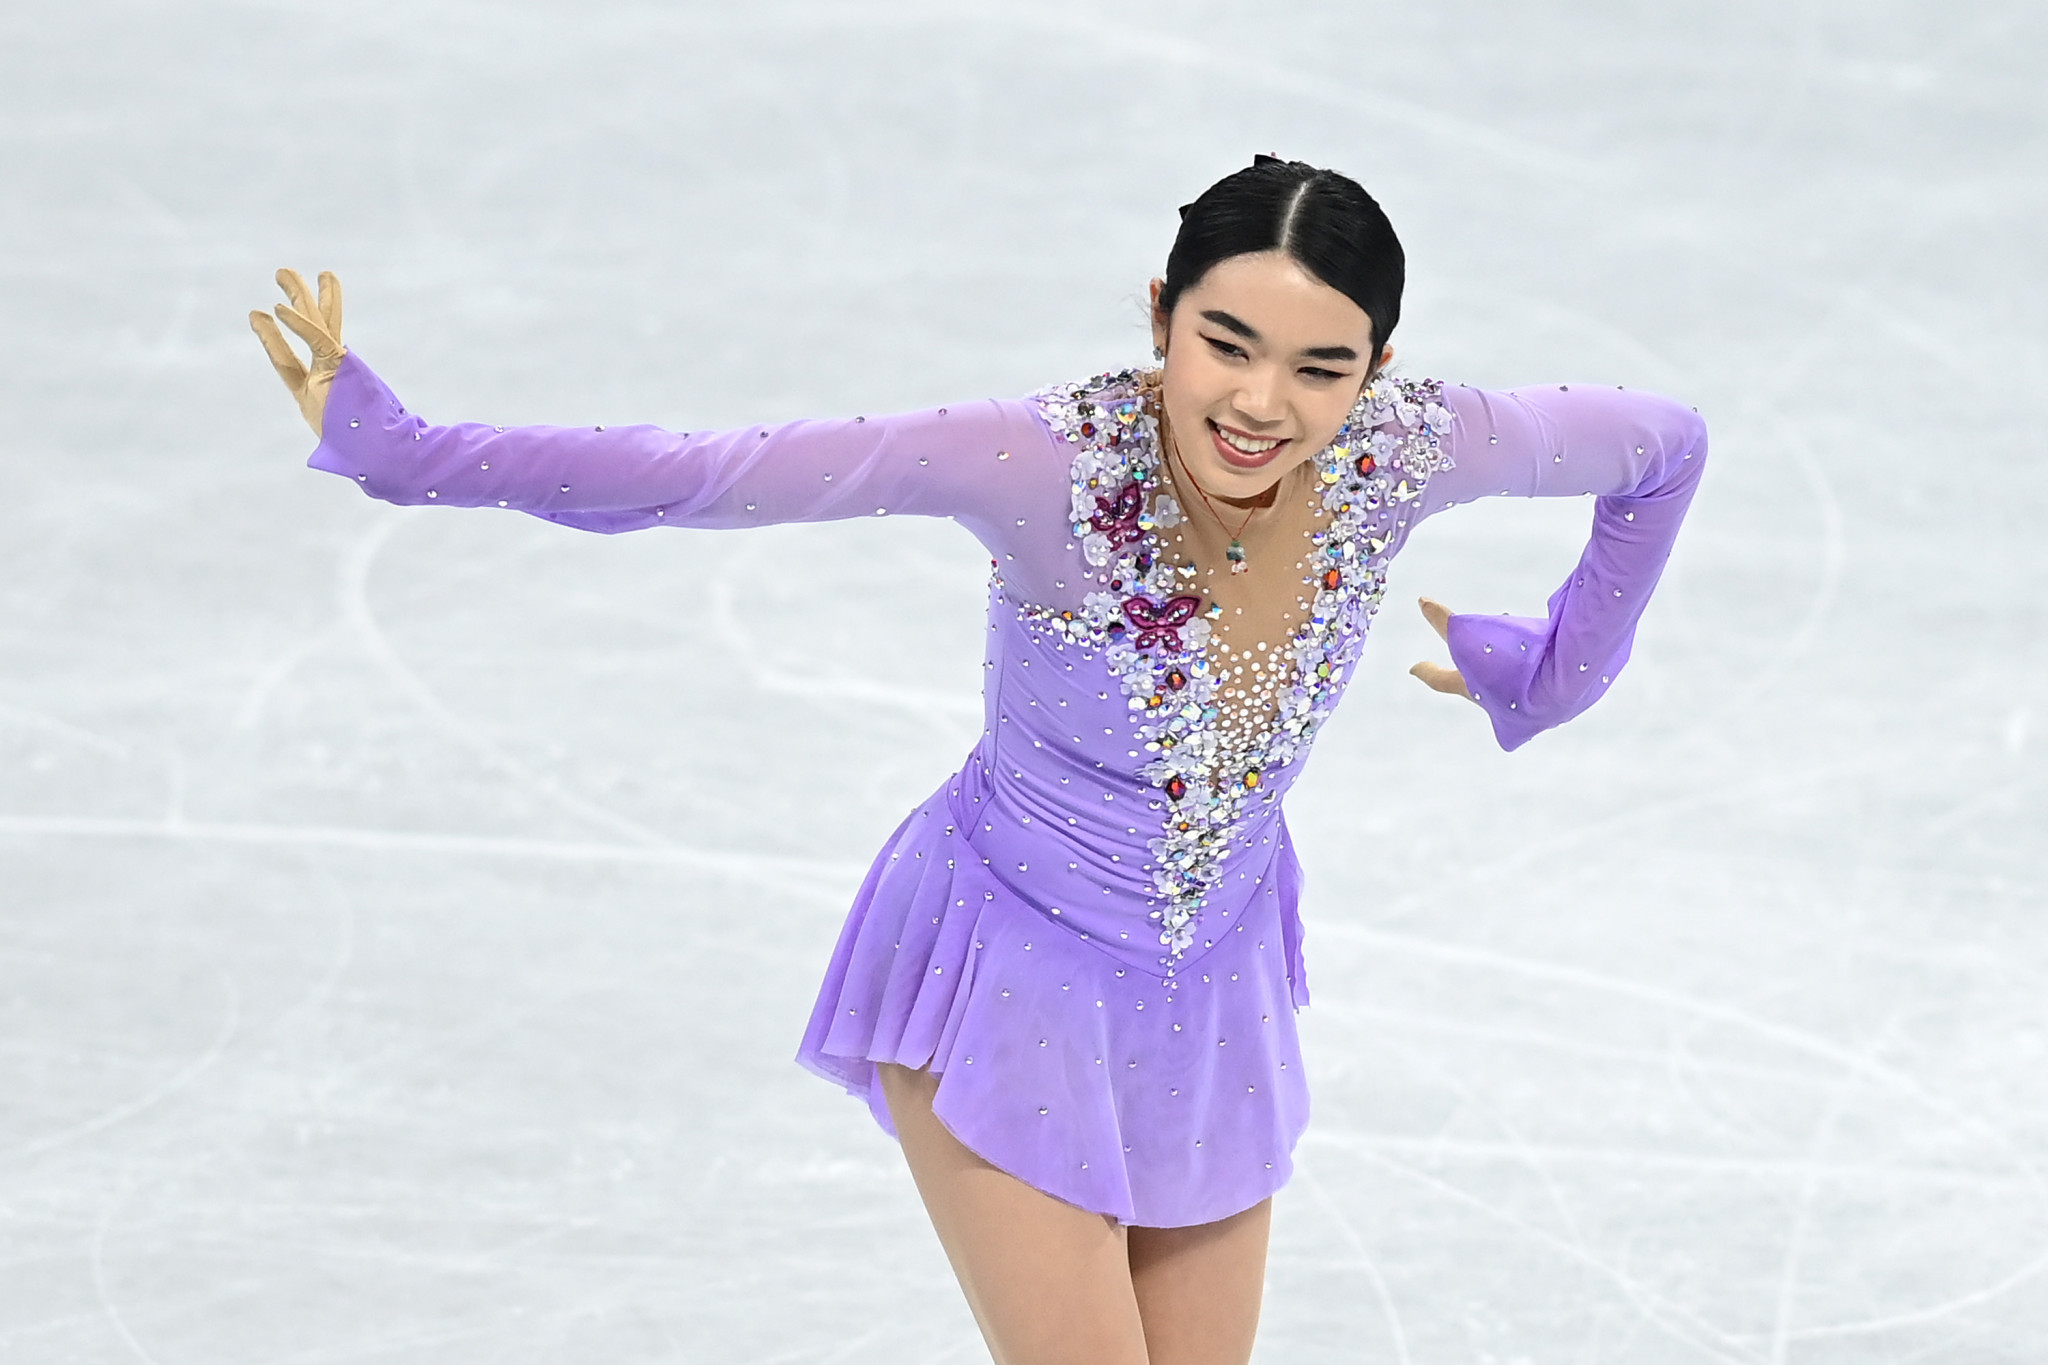 Olympic silver medallist Karen Chen of the US is set to take part in the figure skating gala at Lake Placid 2023 ©Getty Images